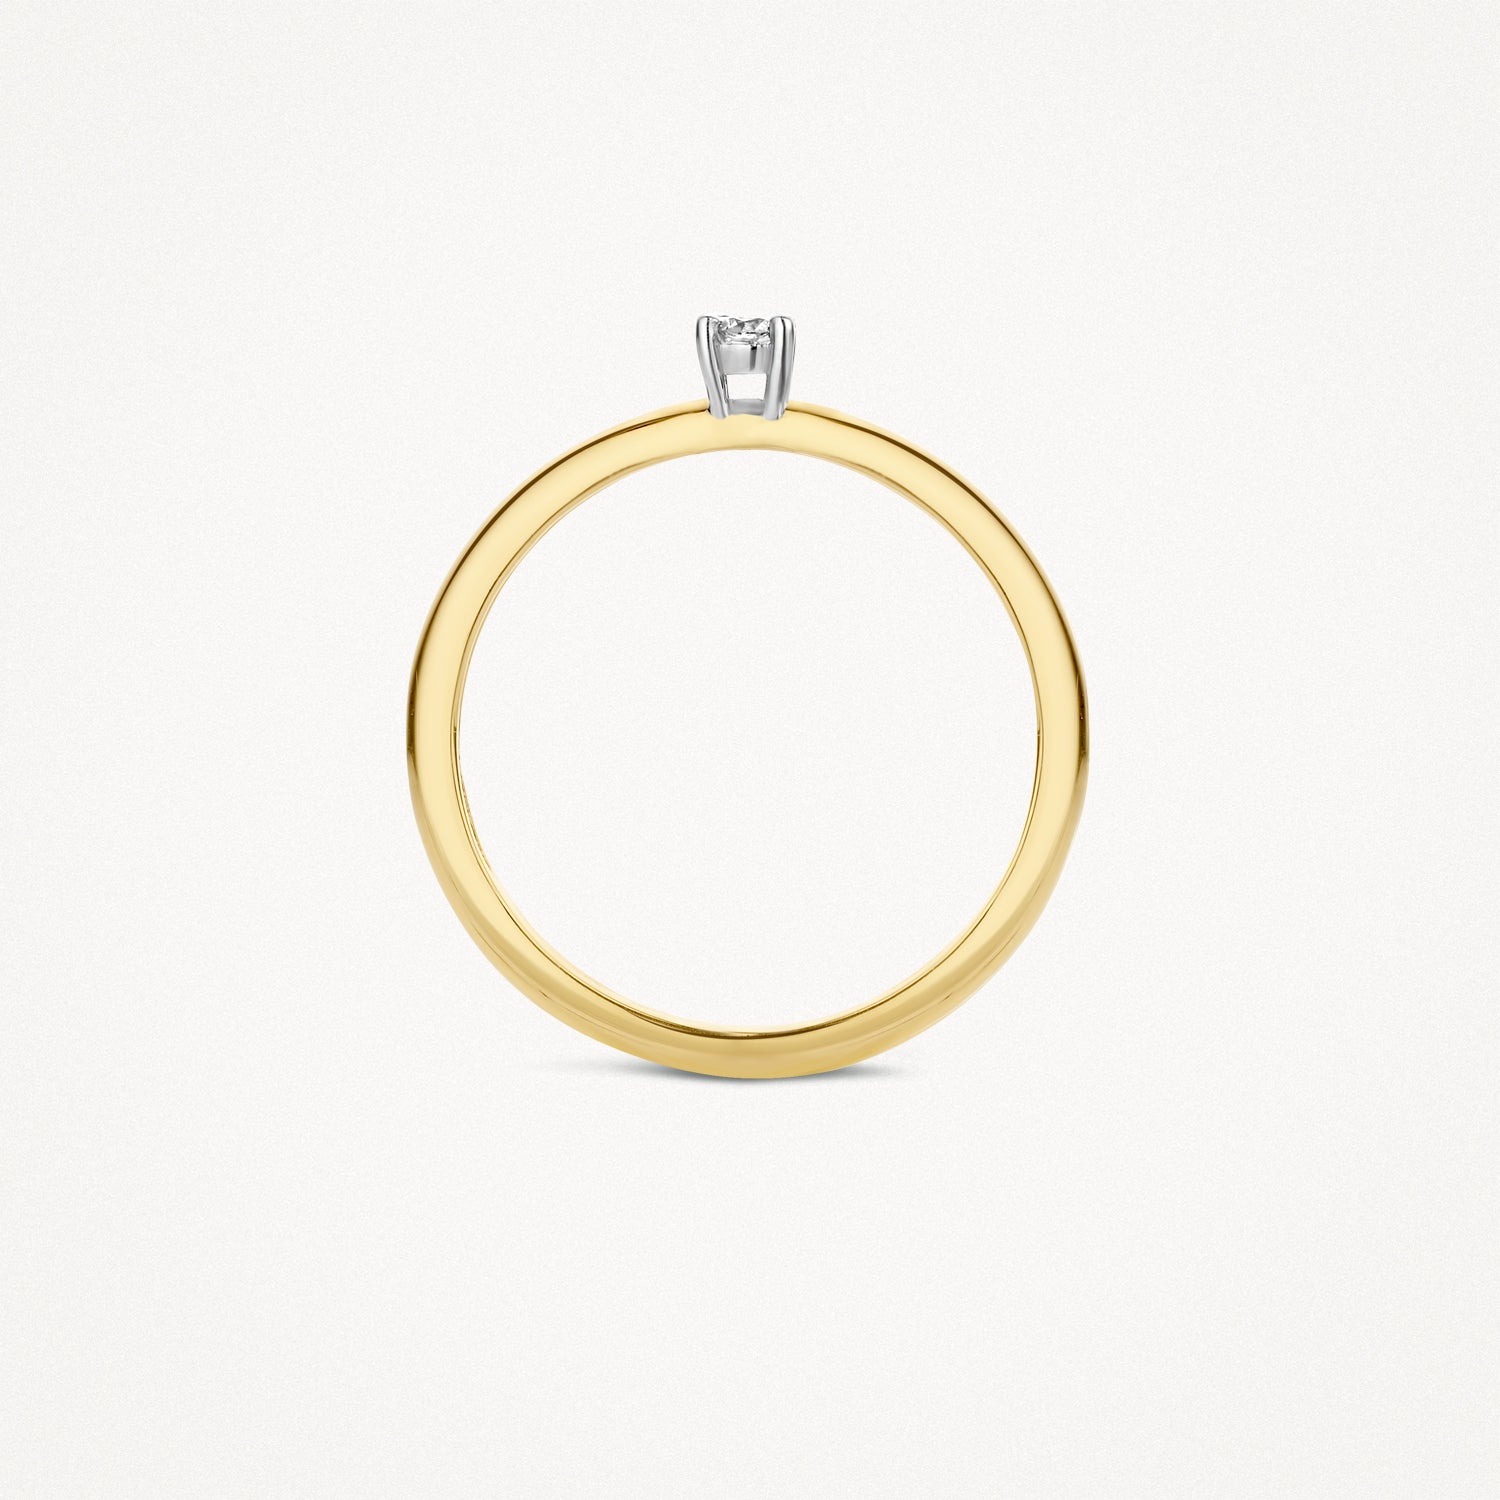 Ring 1602BDI - 14k Yellow and White Gold with diamond